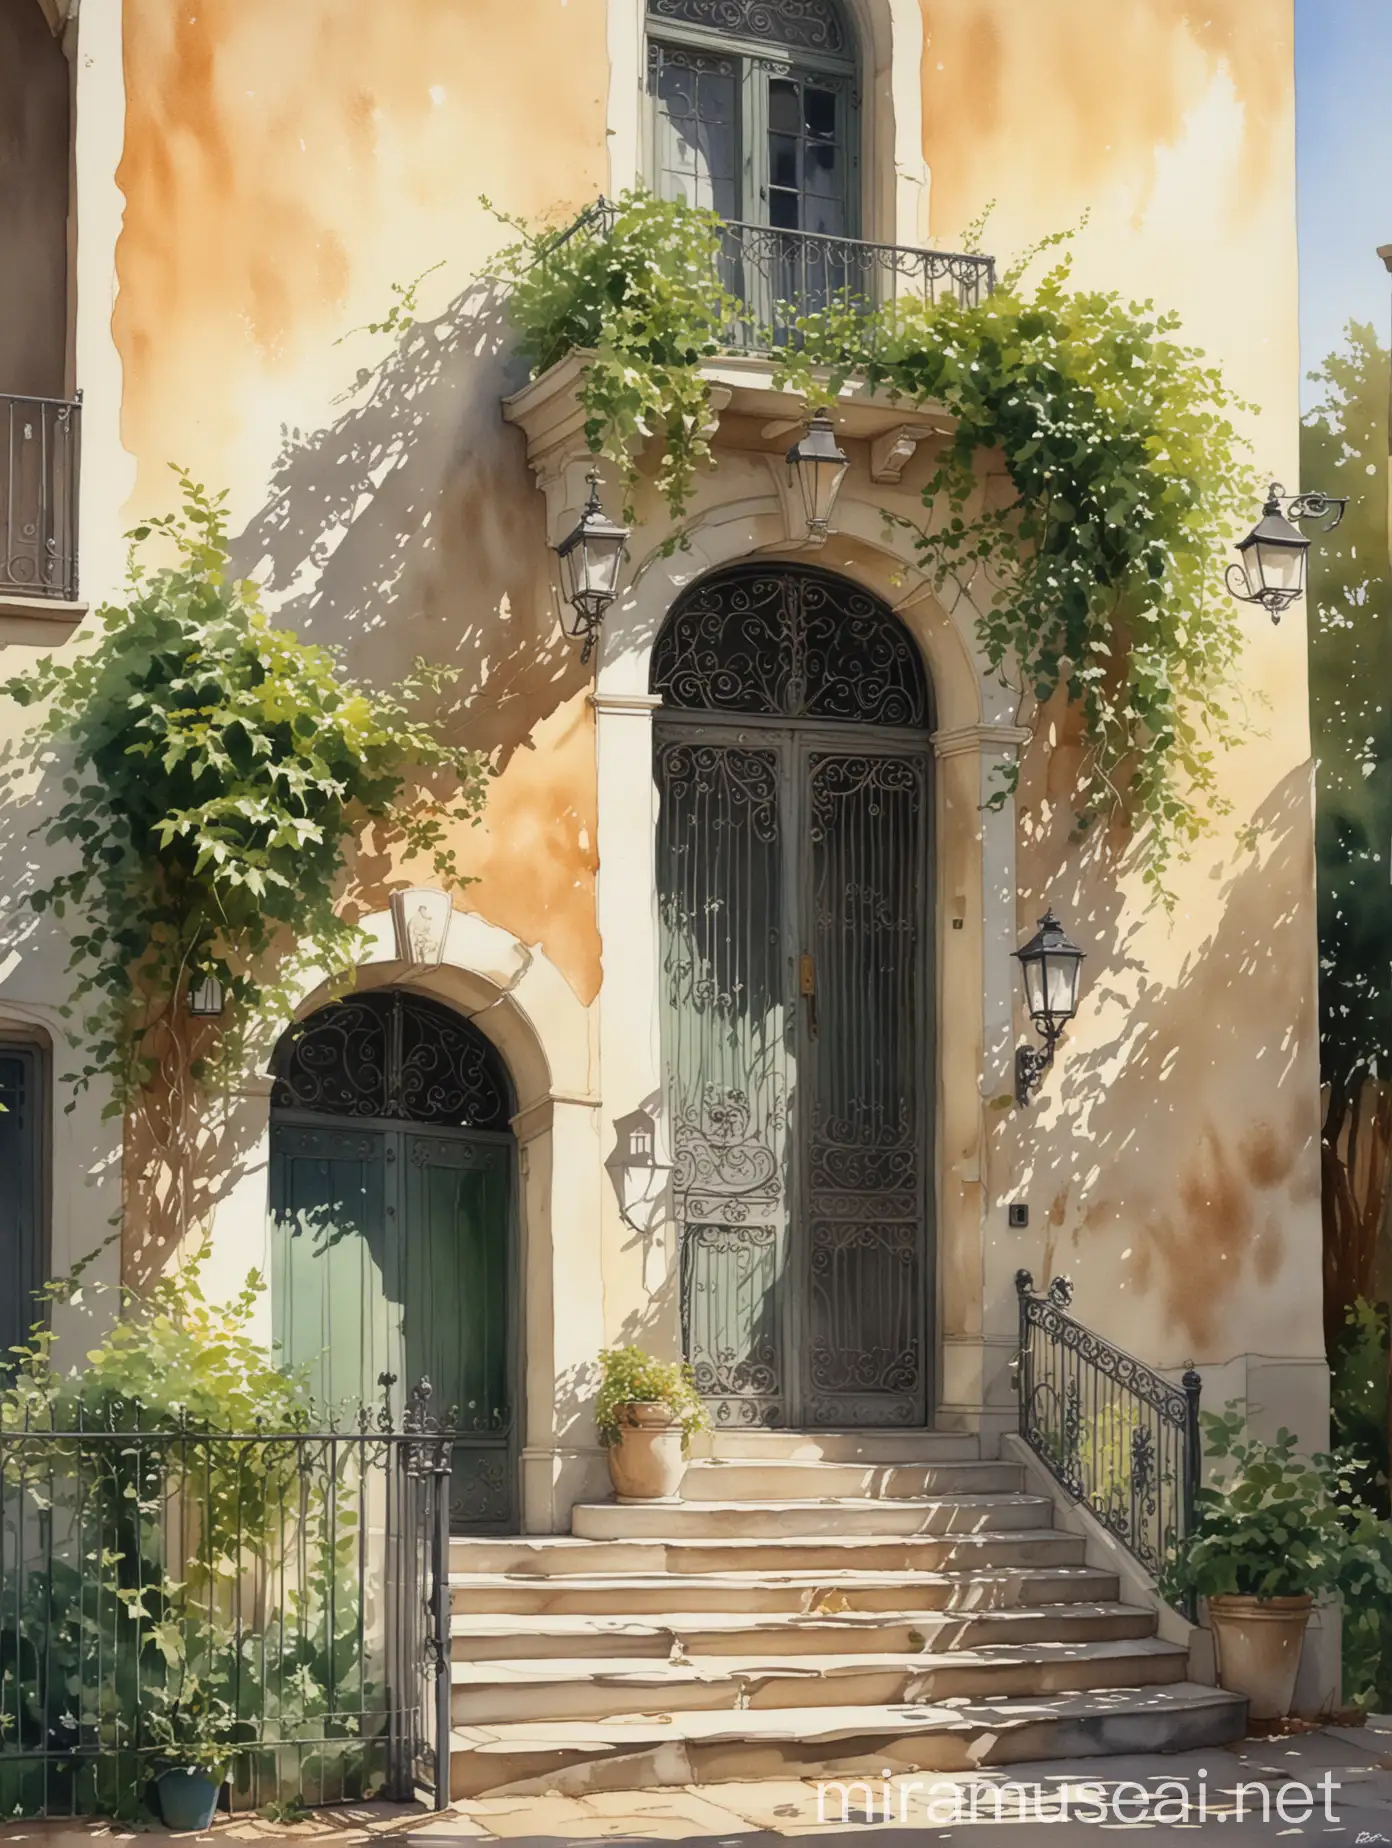 A watercolor painting of a quaint building with a large, ornate entrance, covered in a thick, verdant vine. The building is painted in shades of white and beige, and the sun casts long shadows on the steps and walls. A street lamp with a wrought iron design stands tall on the right. The image is full of light and shadows, with a soft and dreamlike quality.